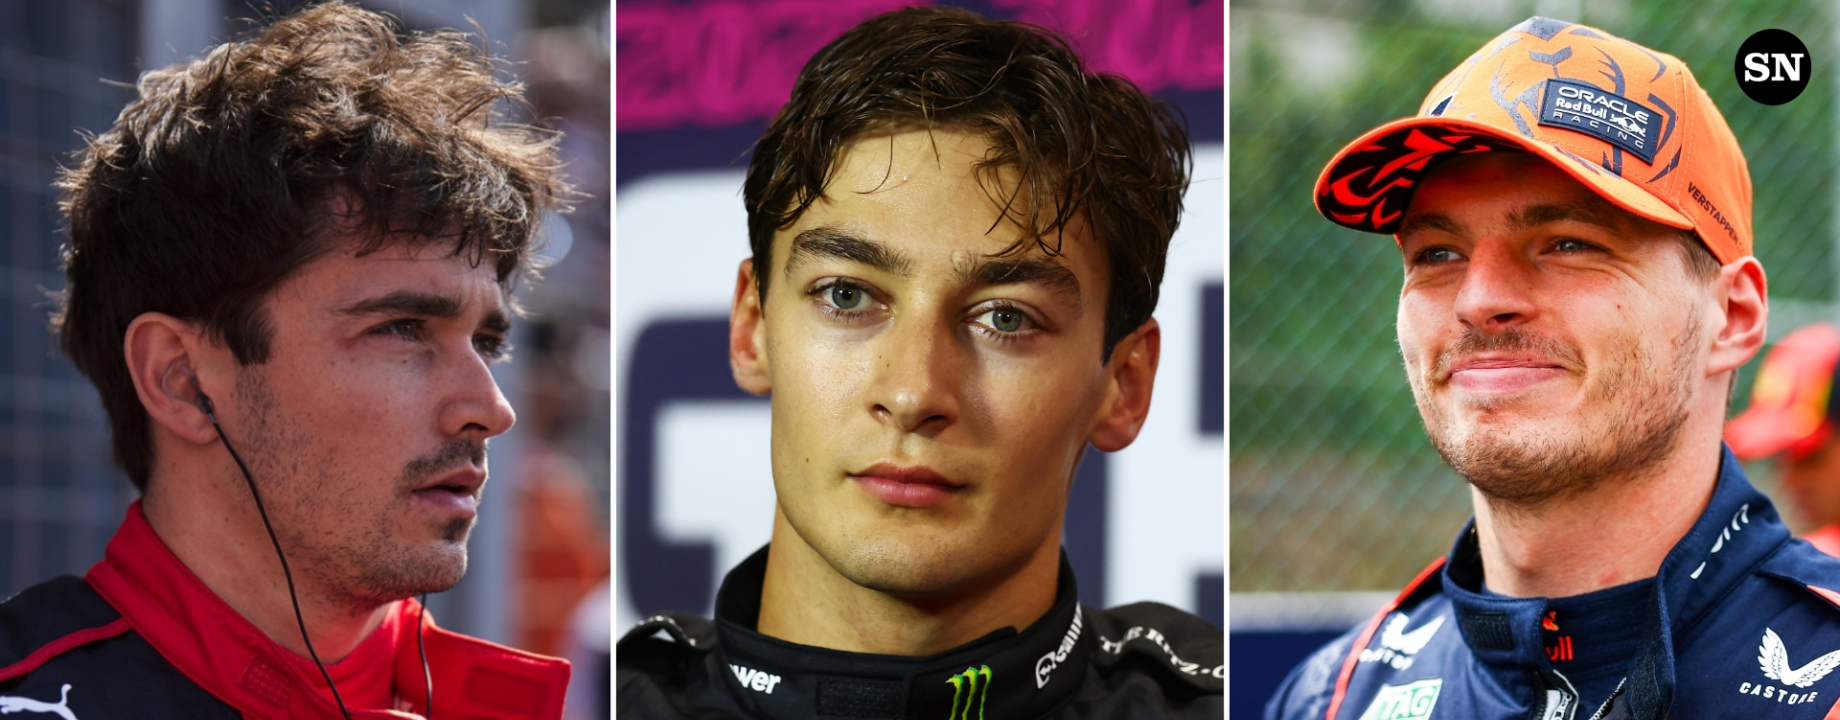 Charles Leclerc George Russell Max Verstappen